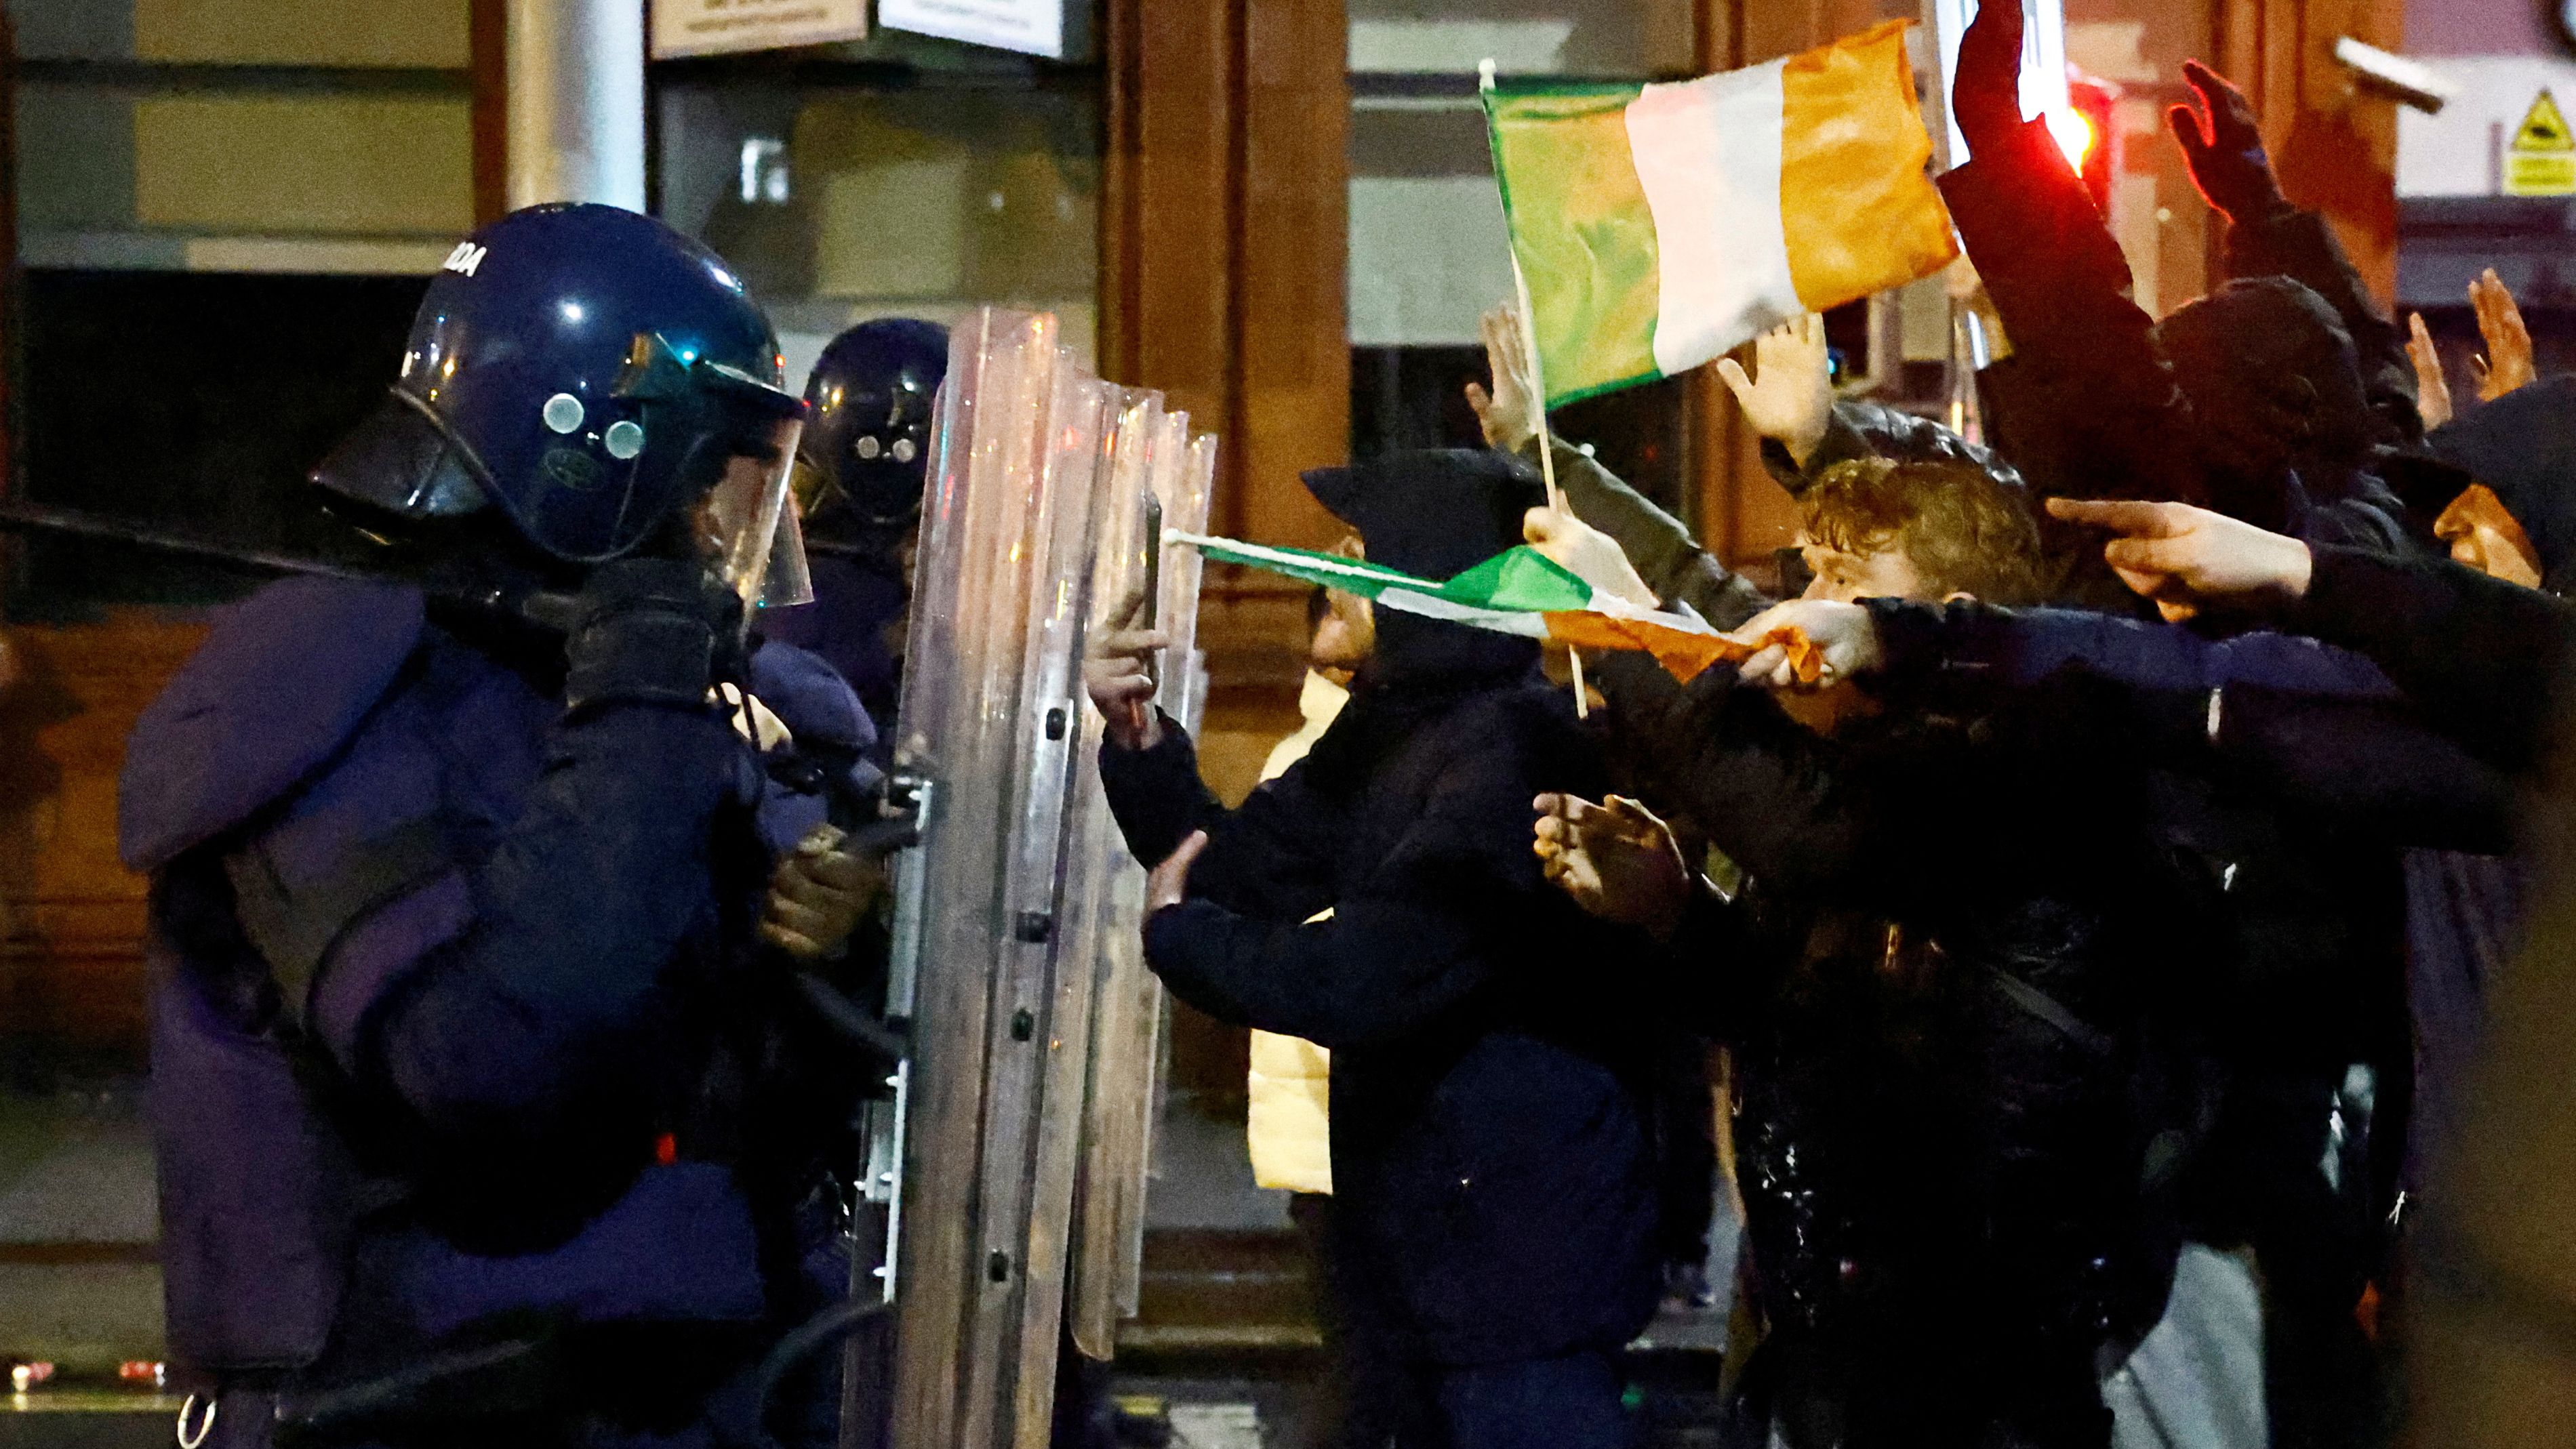 There were 34 arrests after the unrest in the Irish capital./ Clodagh Kilcoyne/Reuters